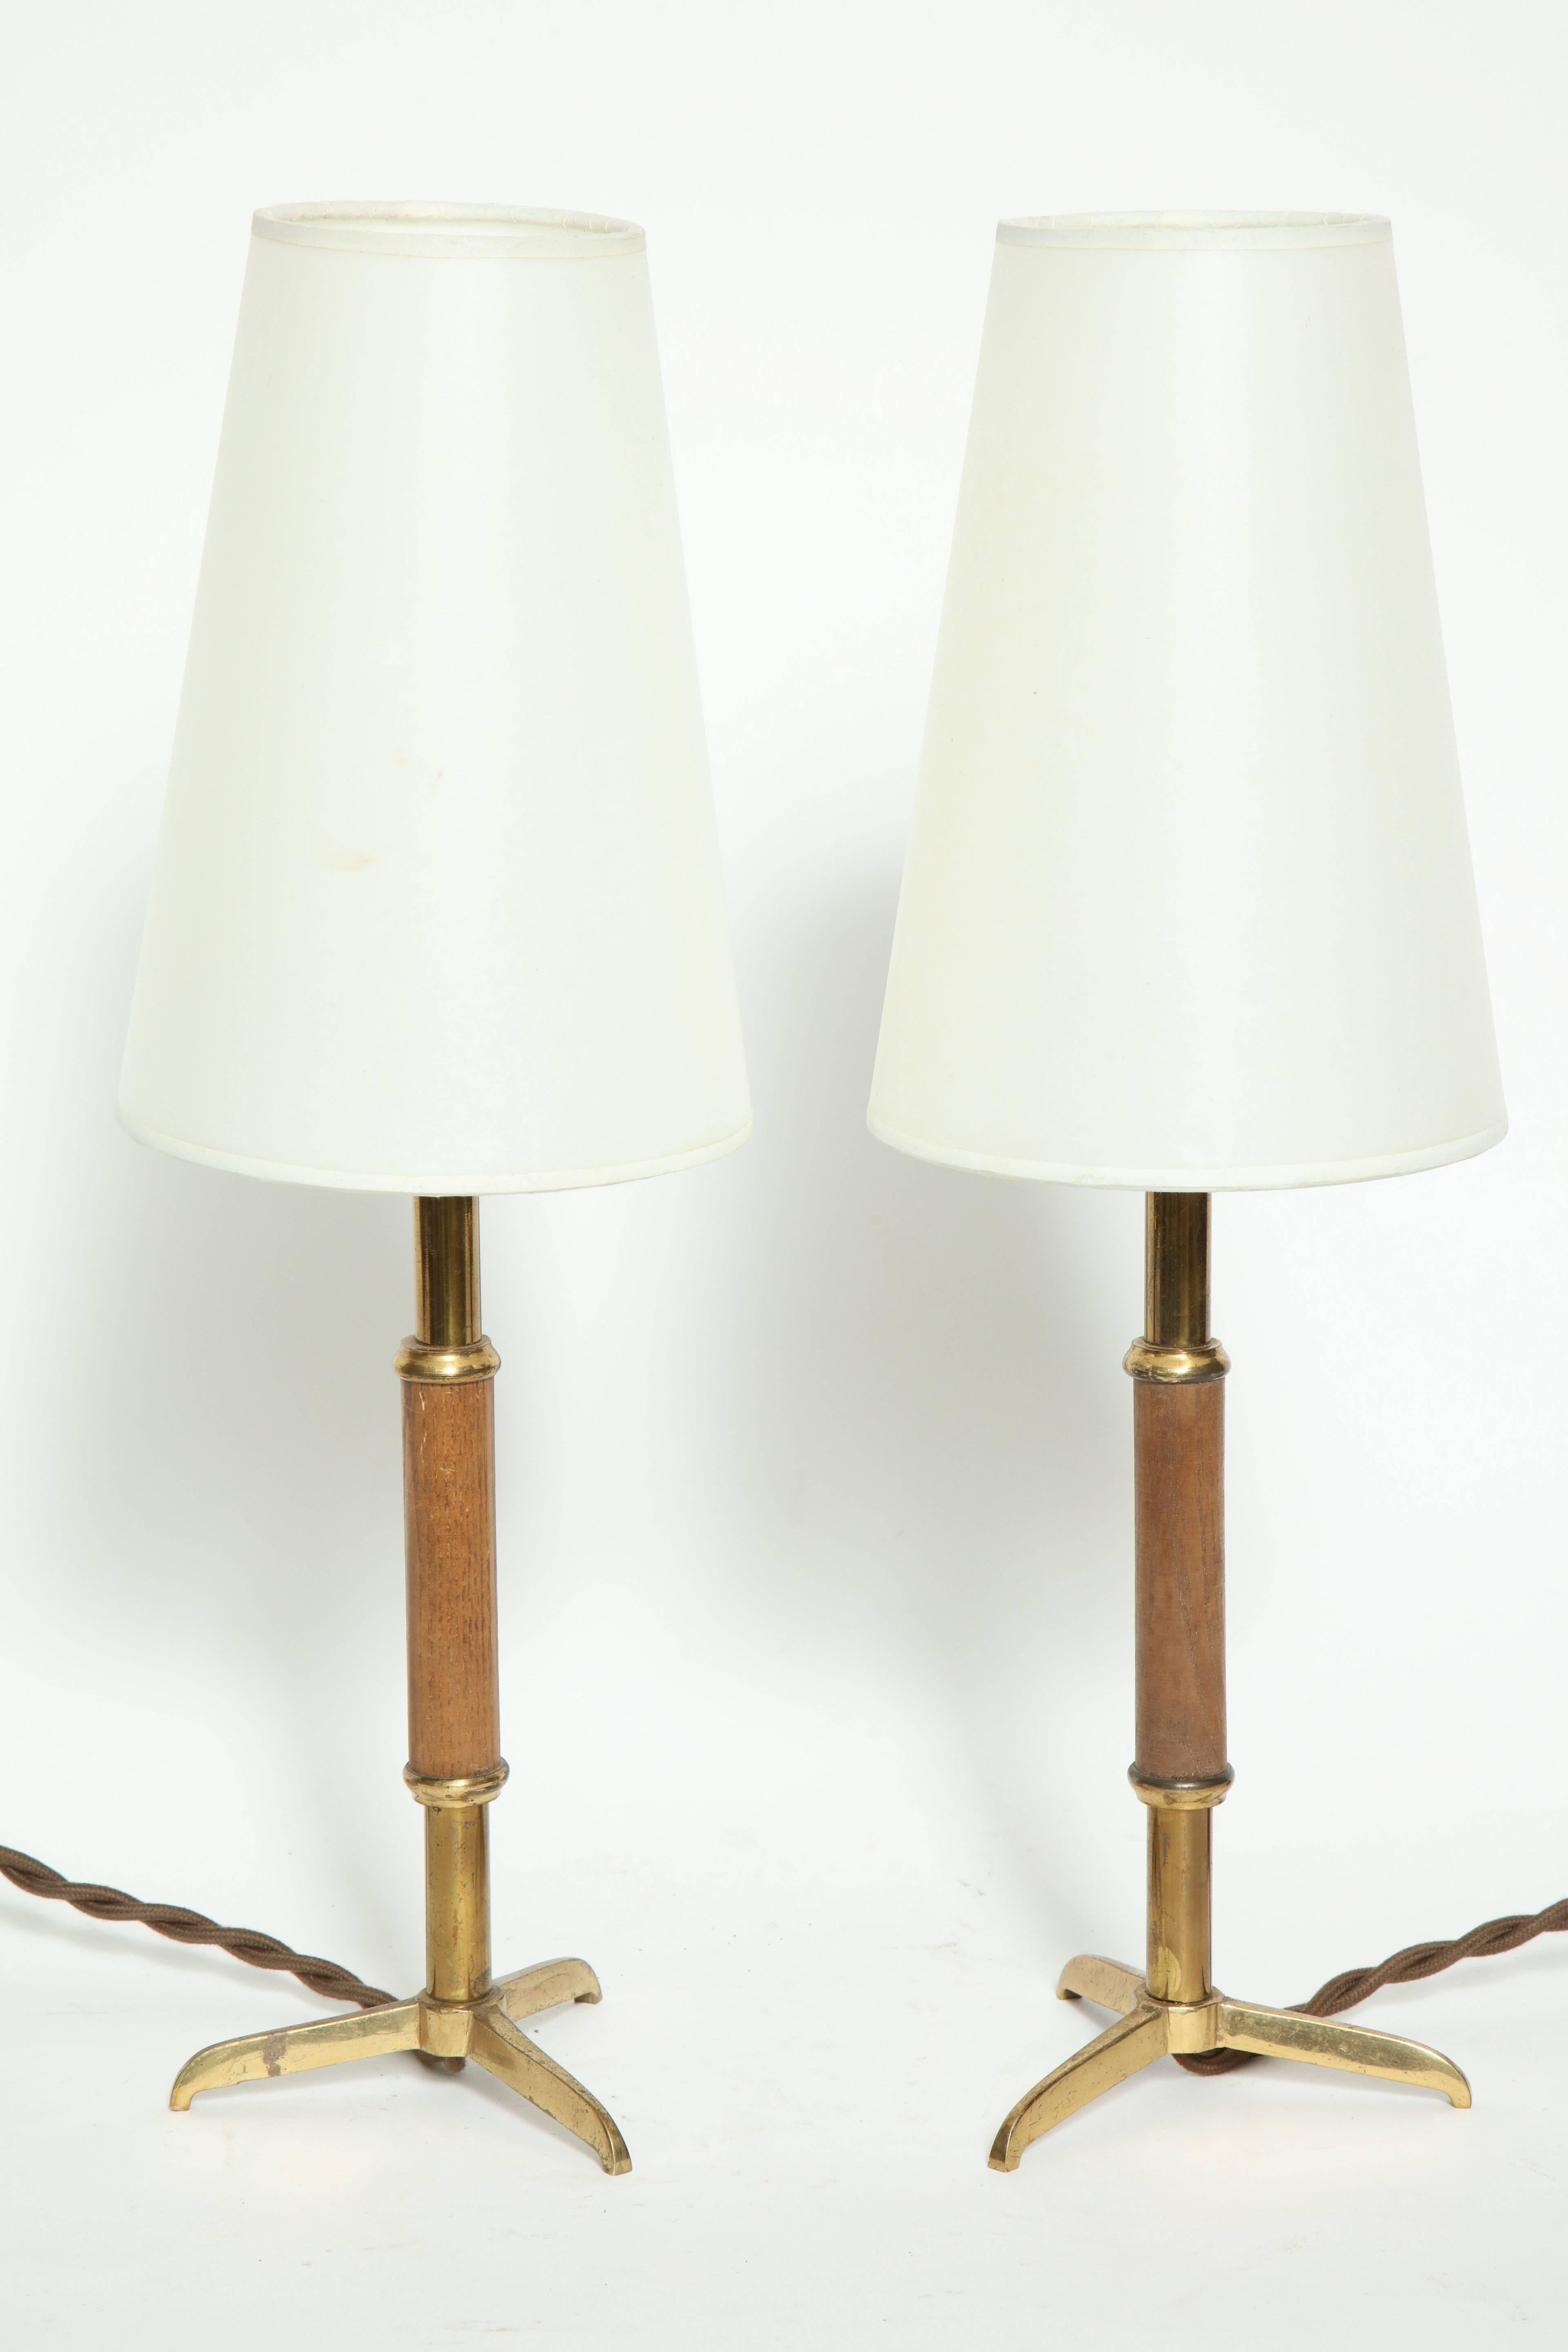 German Table Lamps For Sale